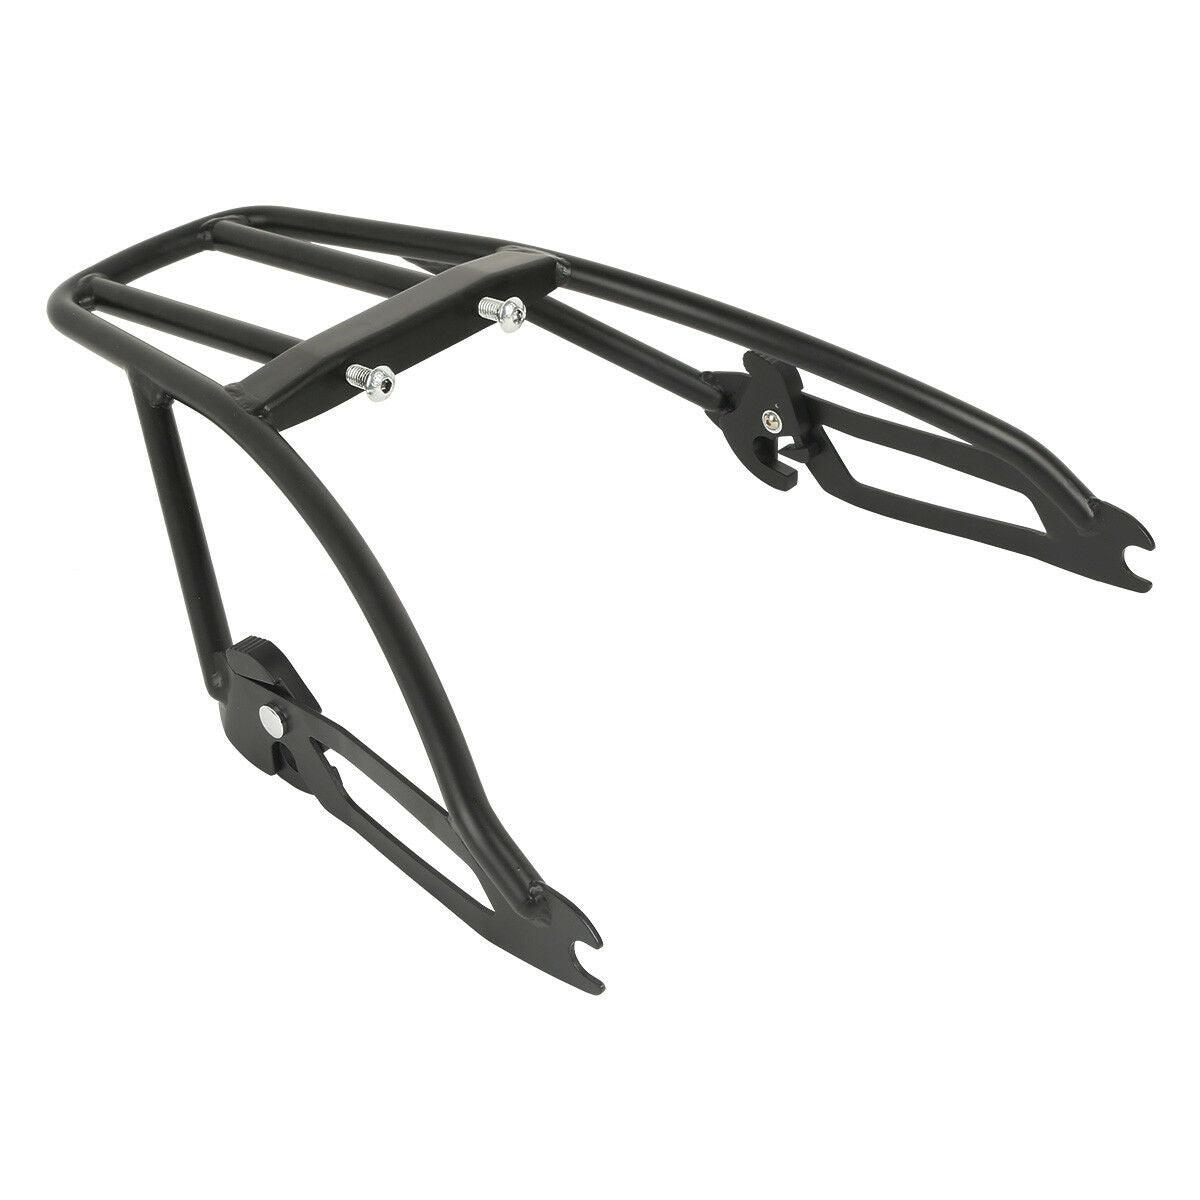 Engine Guards Exhaust Luggage Rack Pad For Harley Street XG500 XG750 2015-2020 - Moto Life Products